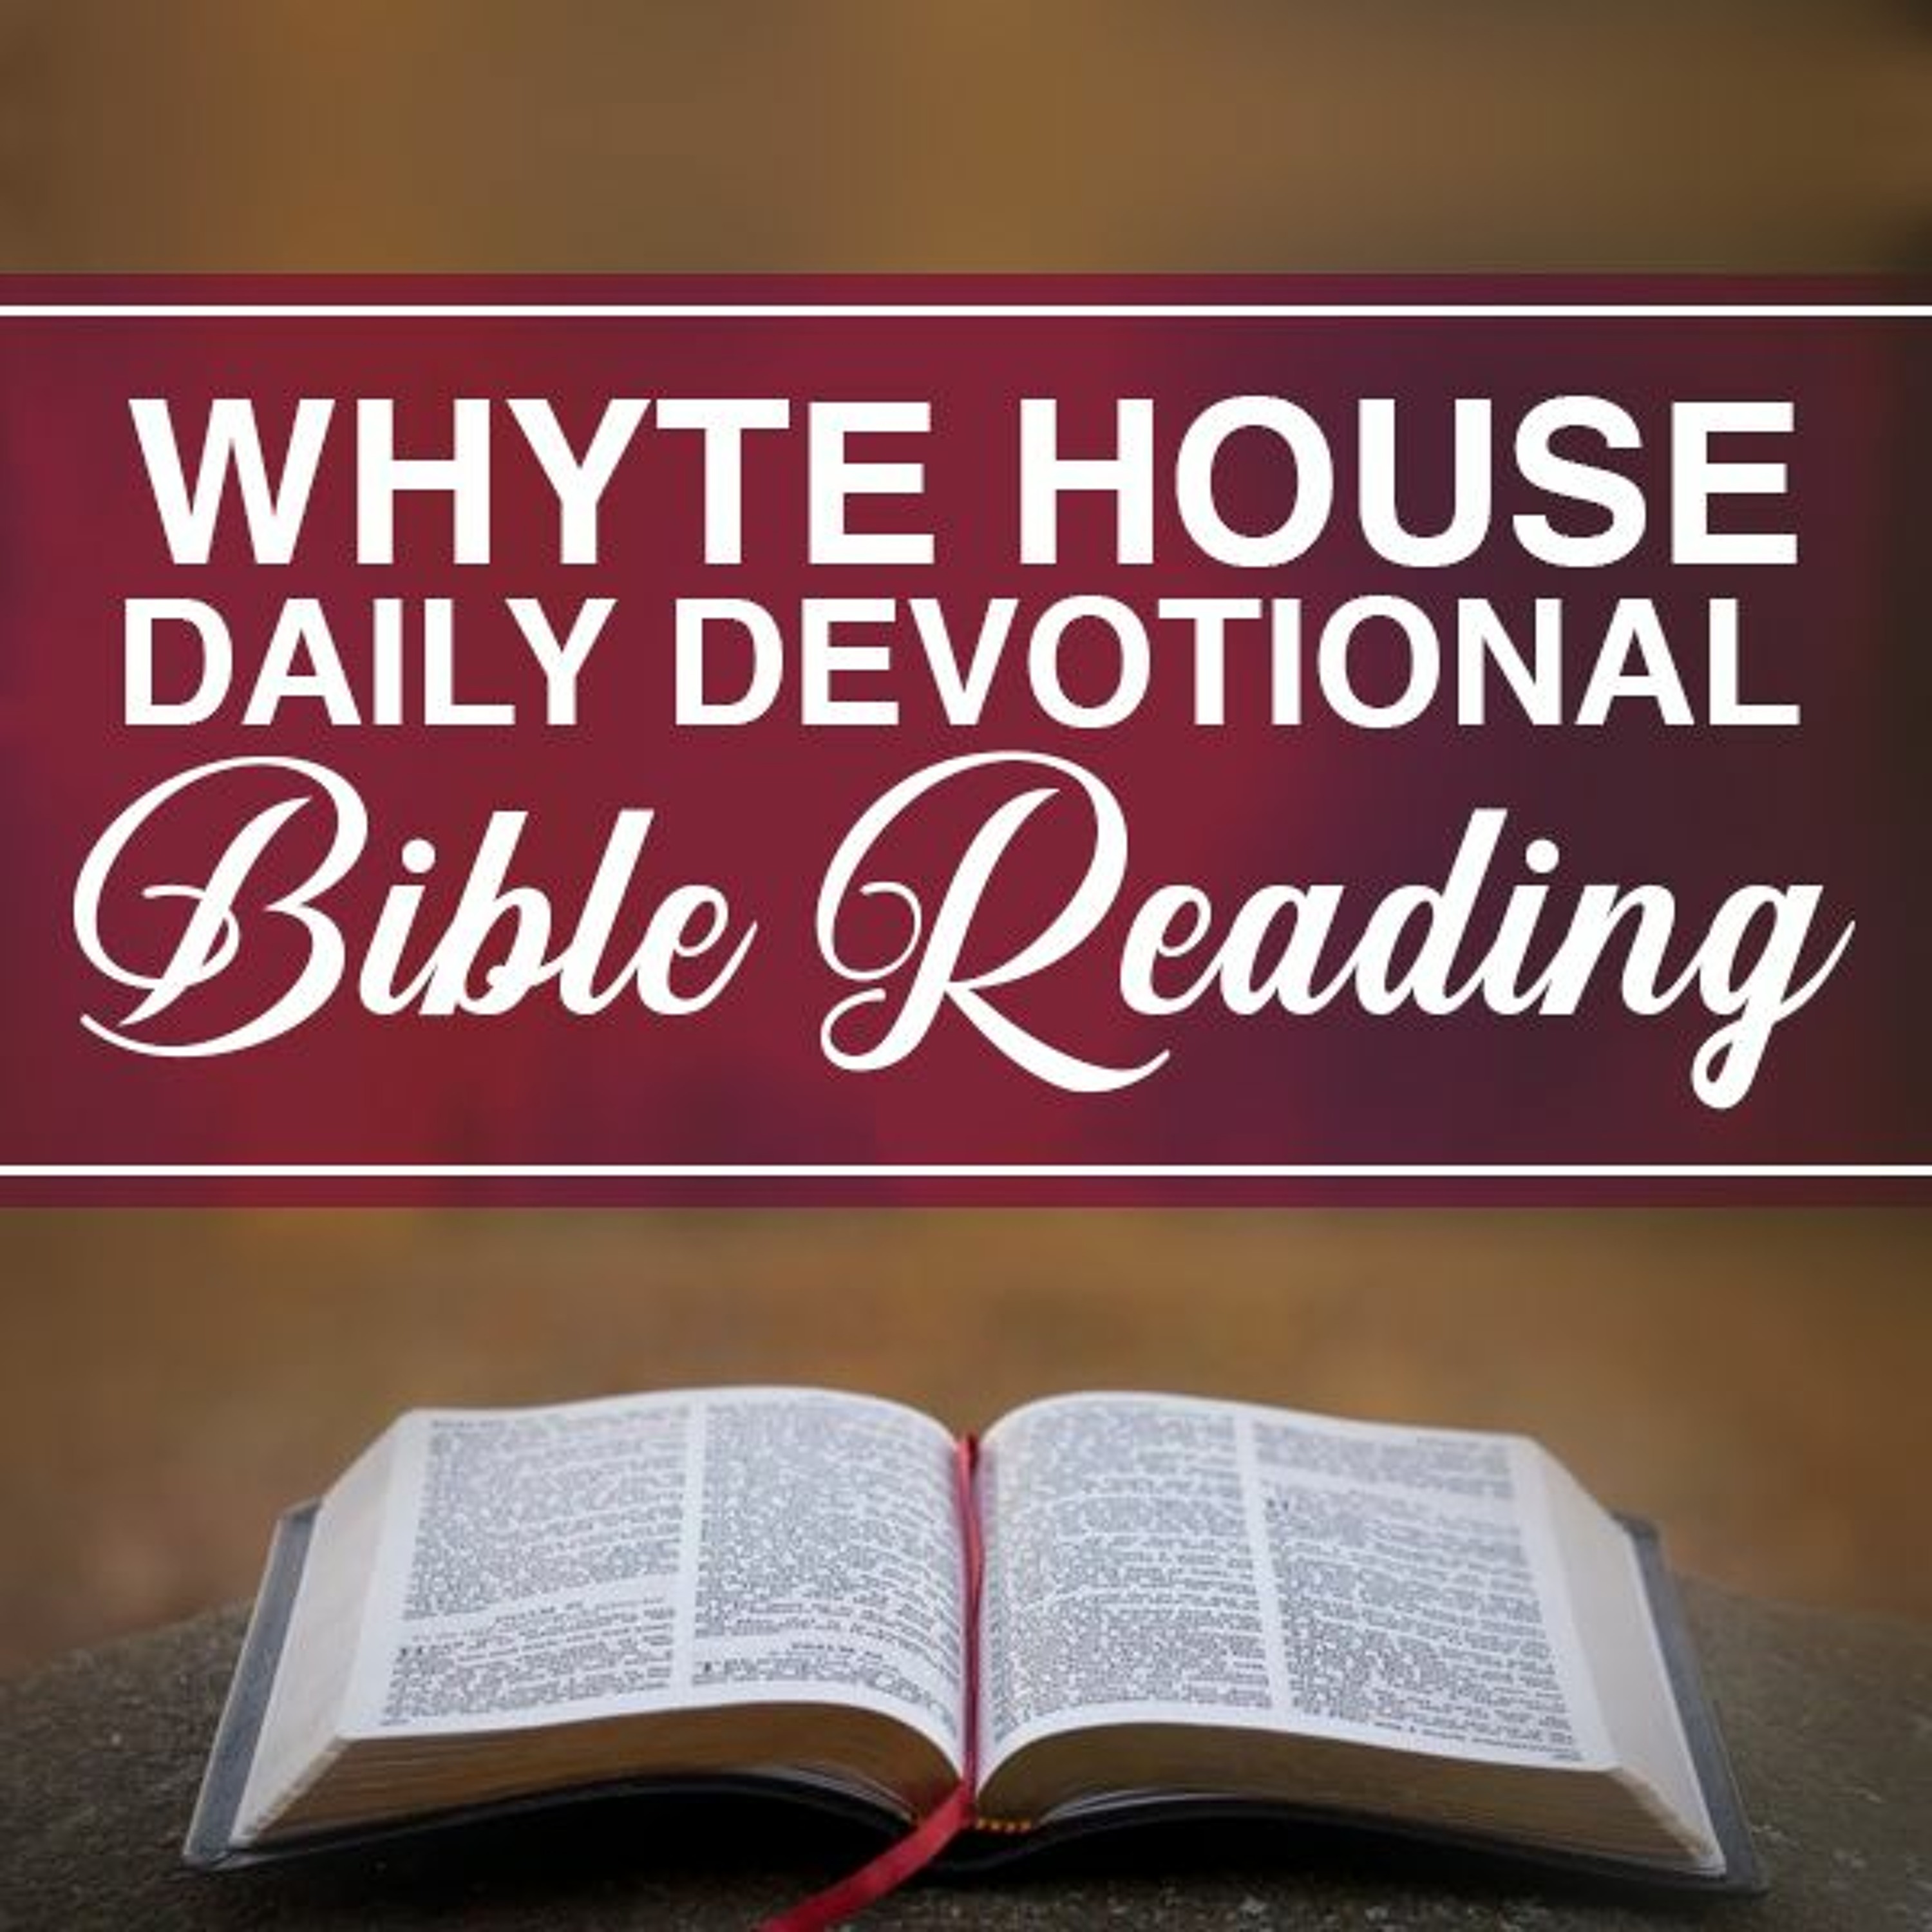 Whyte House Daily Reading of the Chronological Bible Episode #722: 2 Chronicles 17:10-19